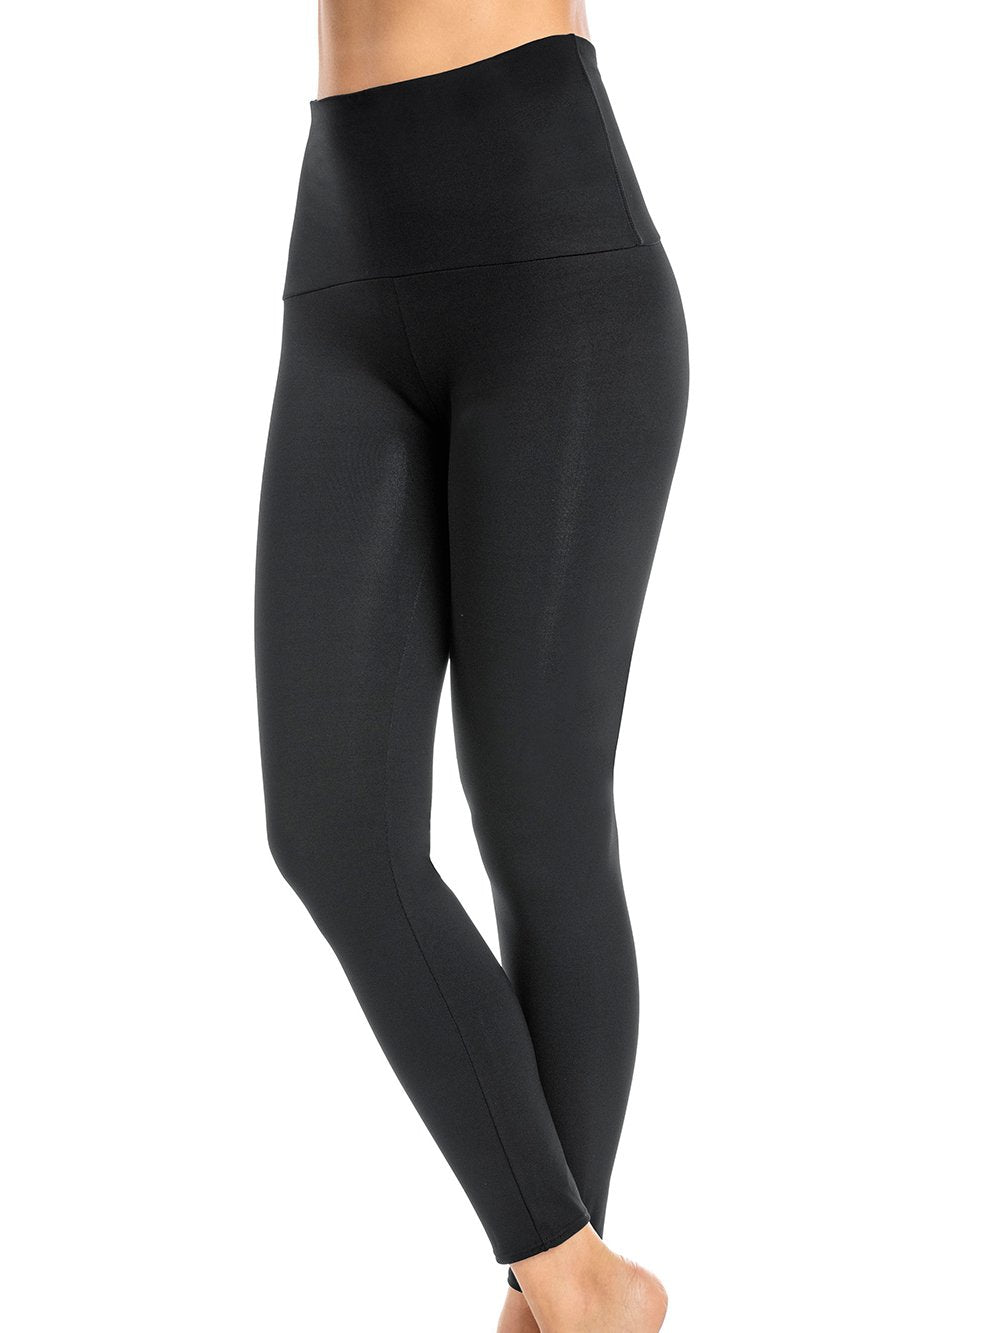 90 Degree By Reflex Lace Active Pants, Tights & Leggings